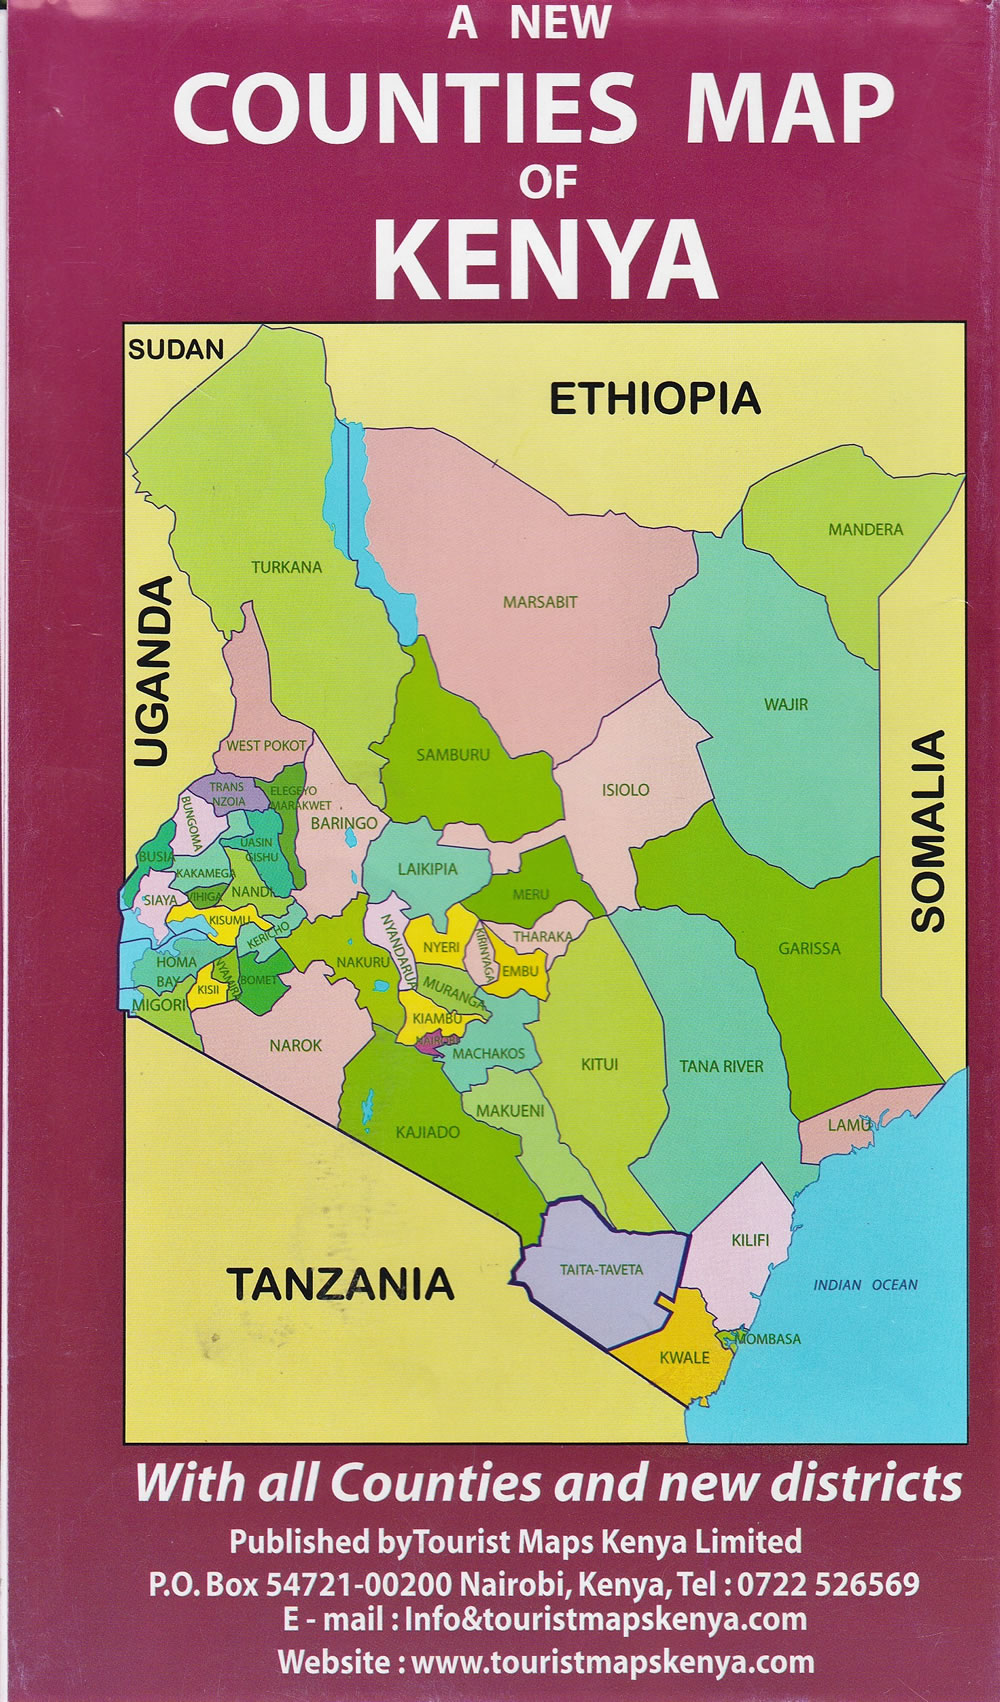 New Counties Map Of Kenya Tourist Maps Kenya Books Stationery Computers Laptops And More Buy Online And Get Free Delivery On Orders Above Ksh